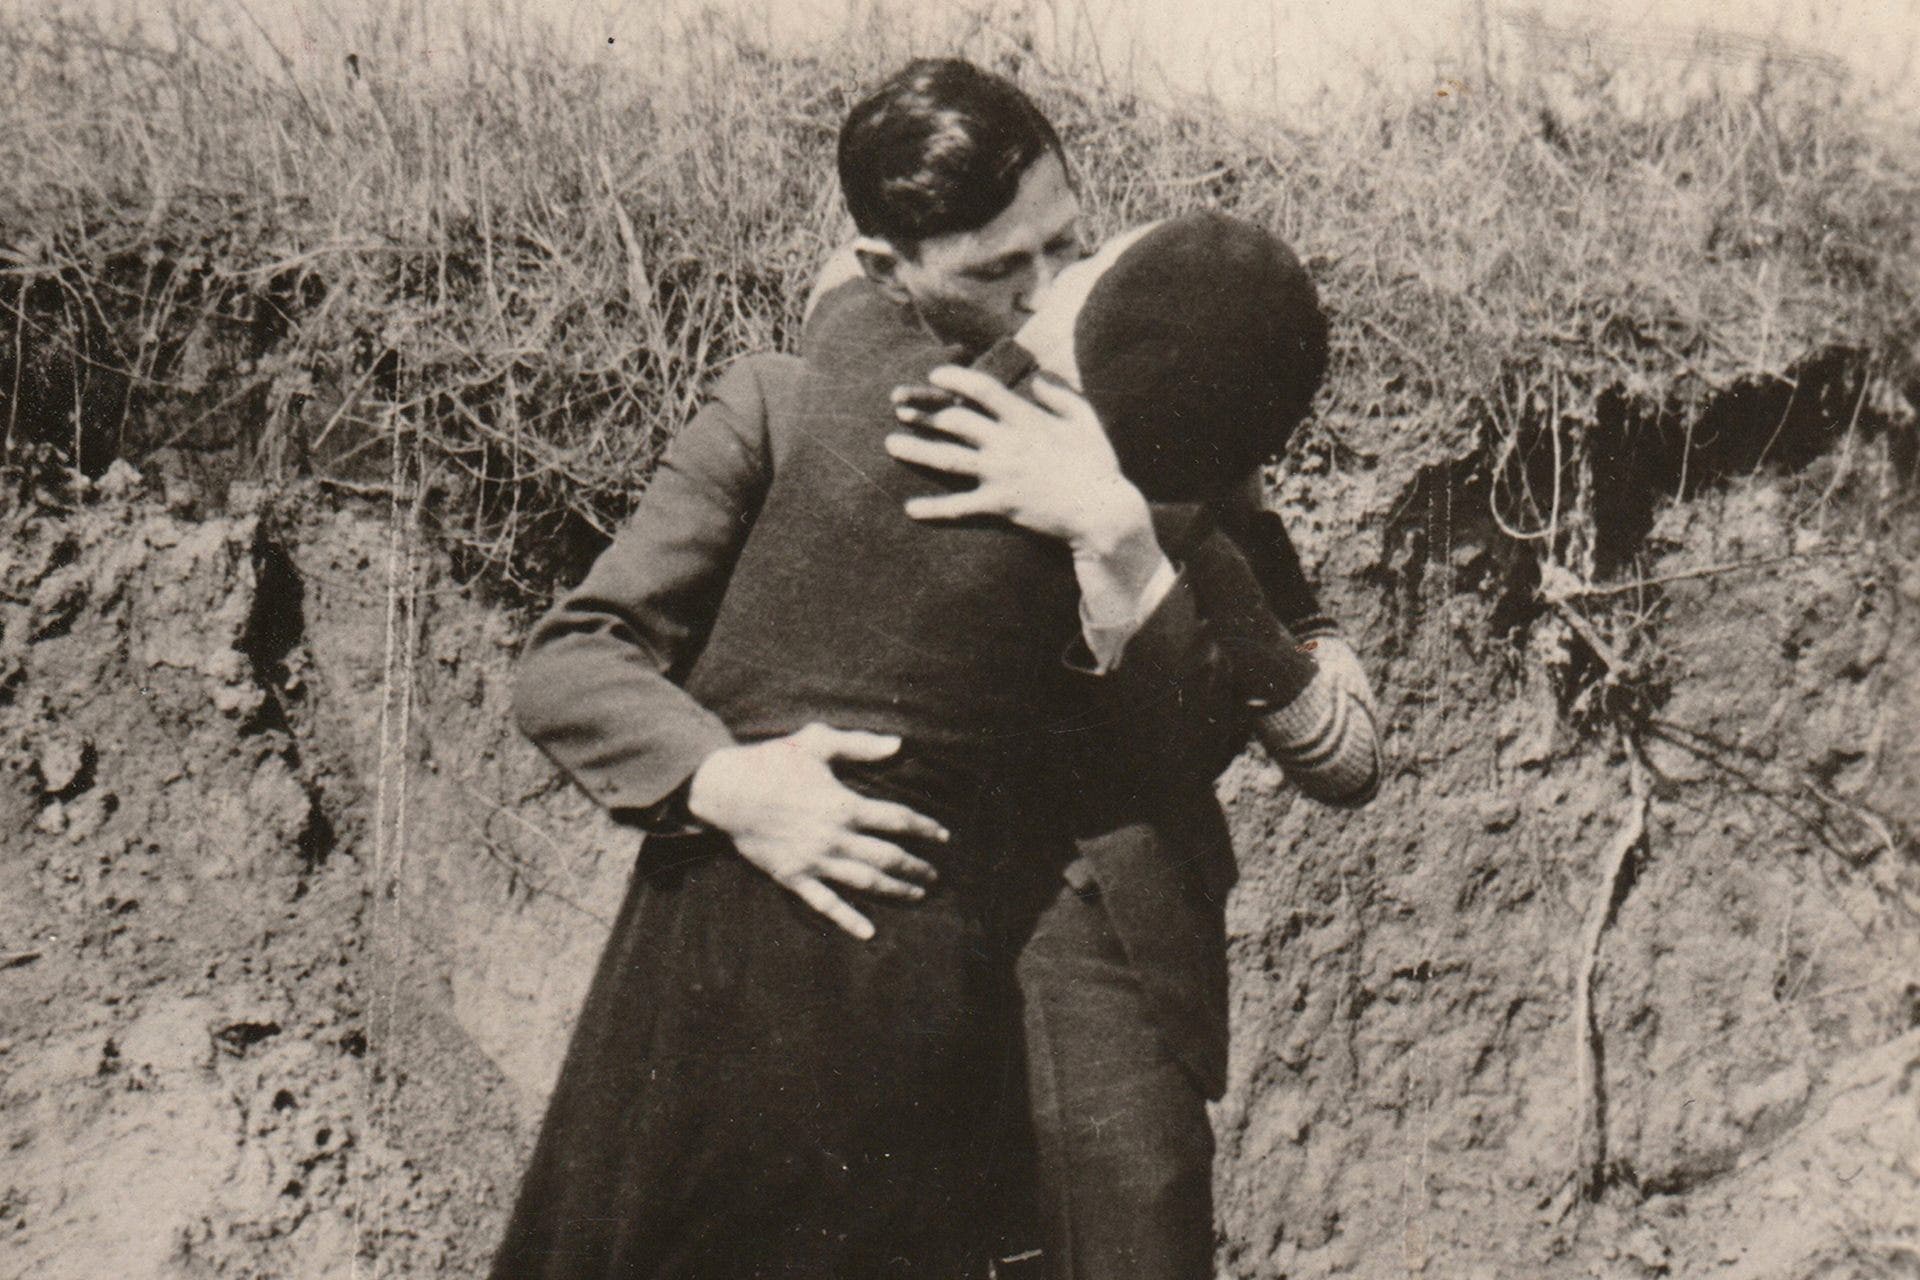 Photos surface of Bonnie and Clyde